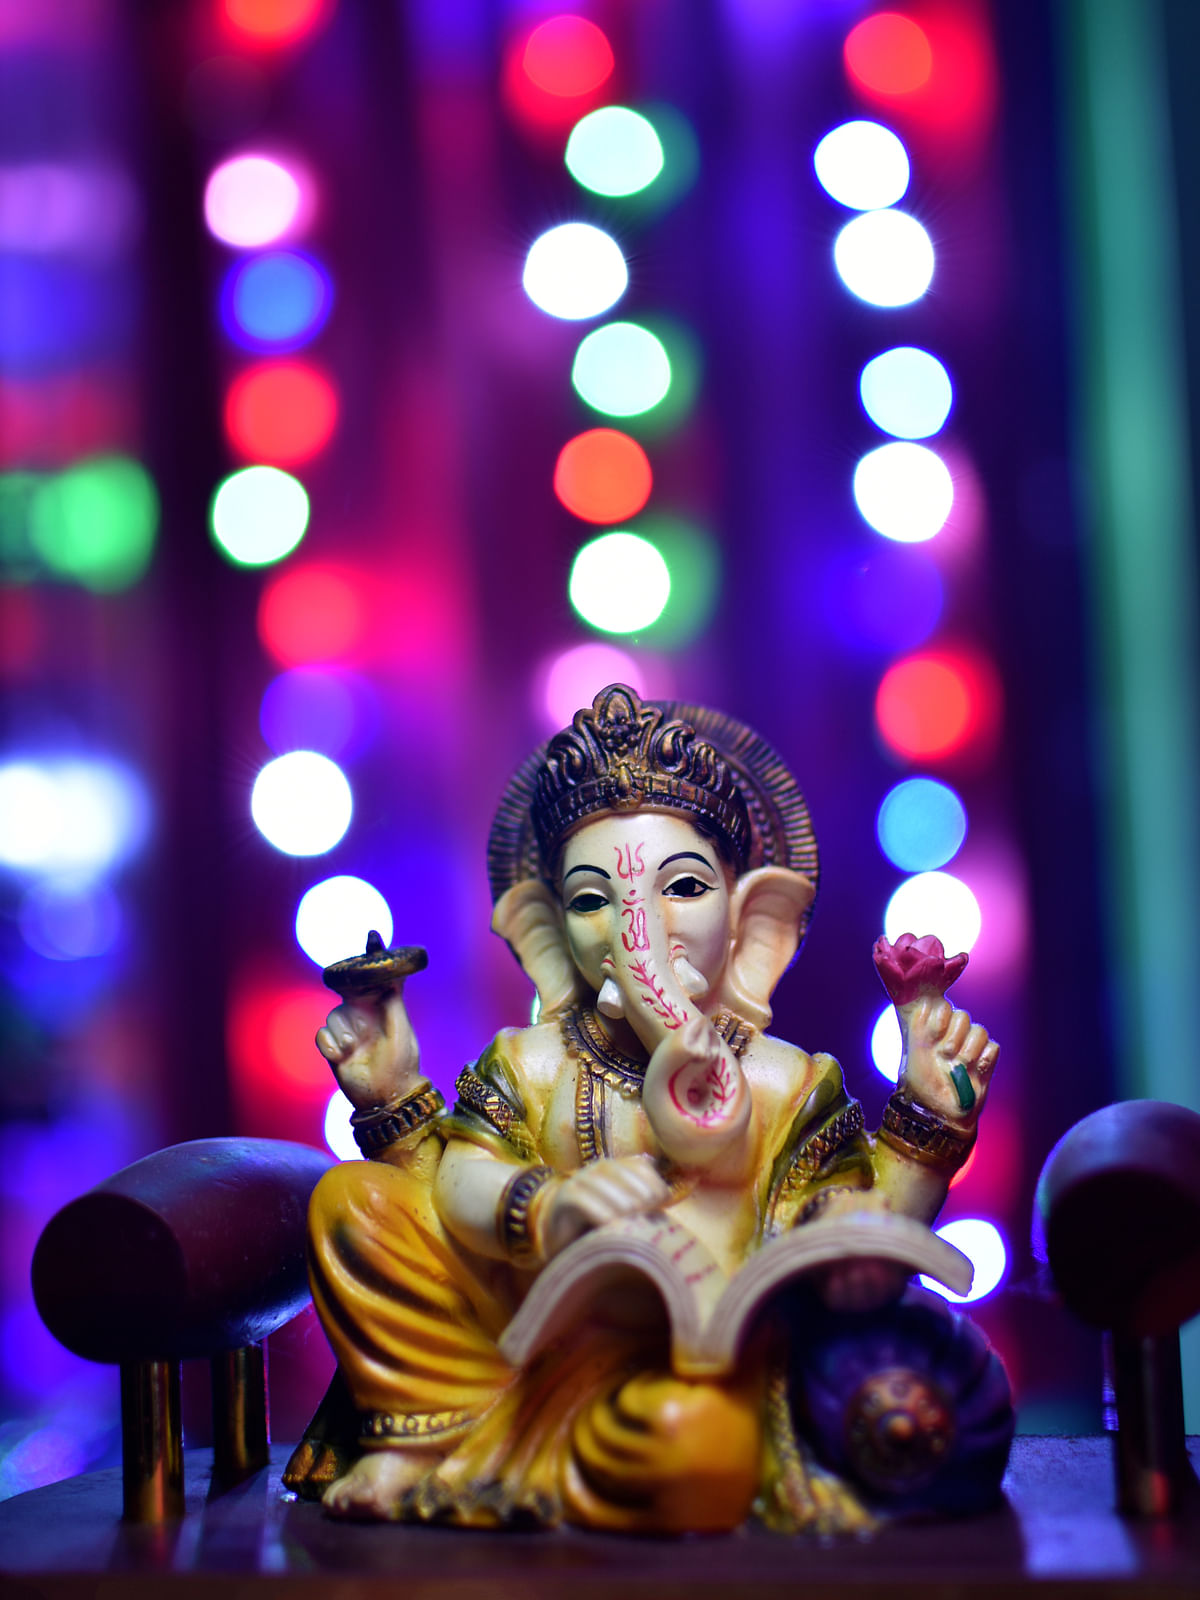 Here are some ideas for you to decorate your home this Ganpati festival and make it even more special.